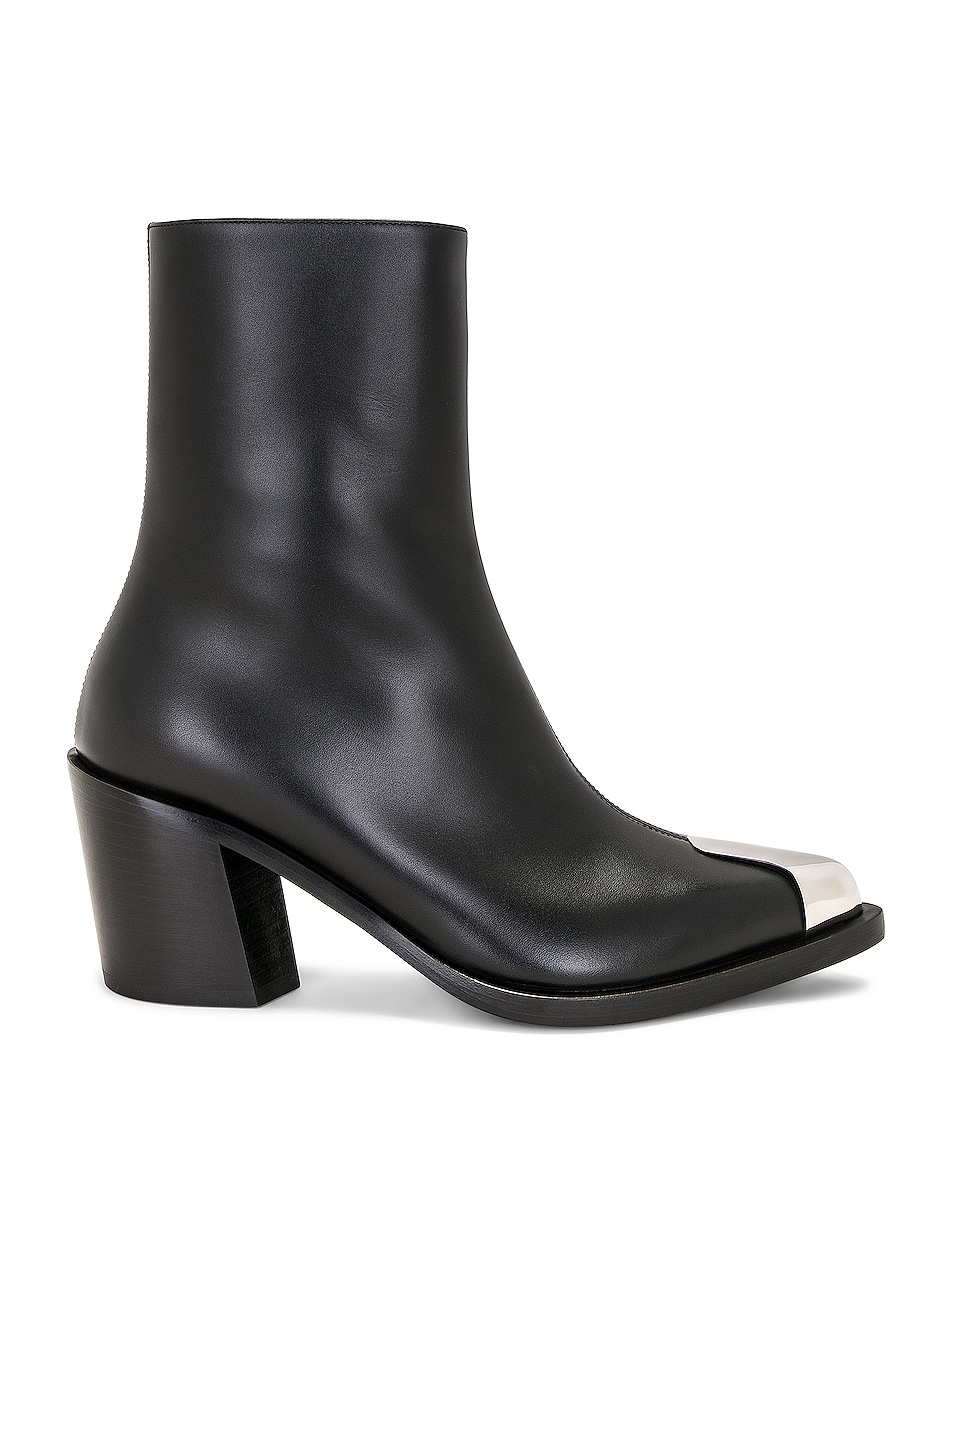 Image 1 of Alexander McQueen Leather Boot in Black & Silver